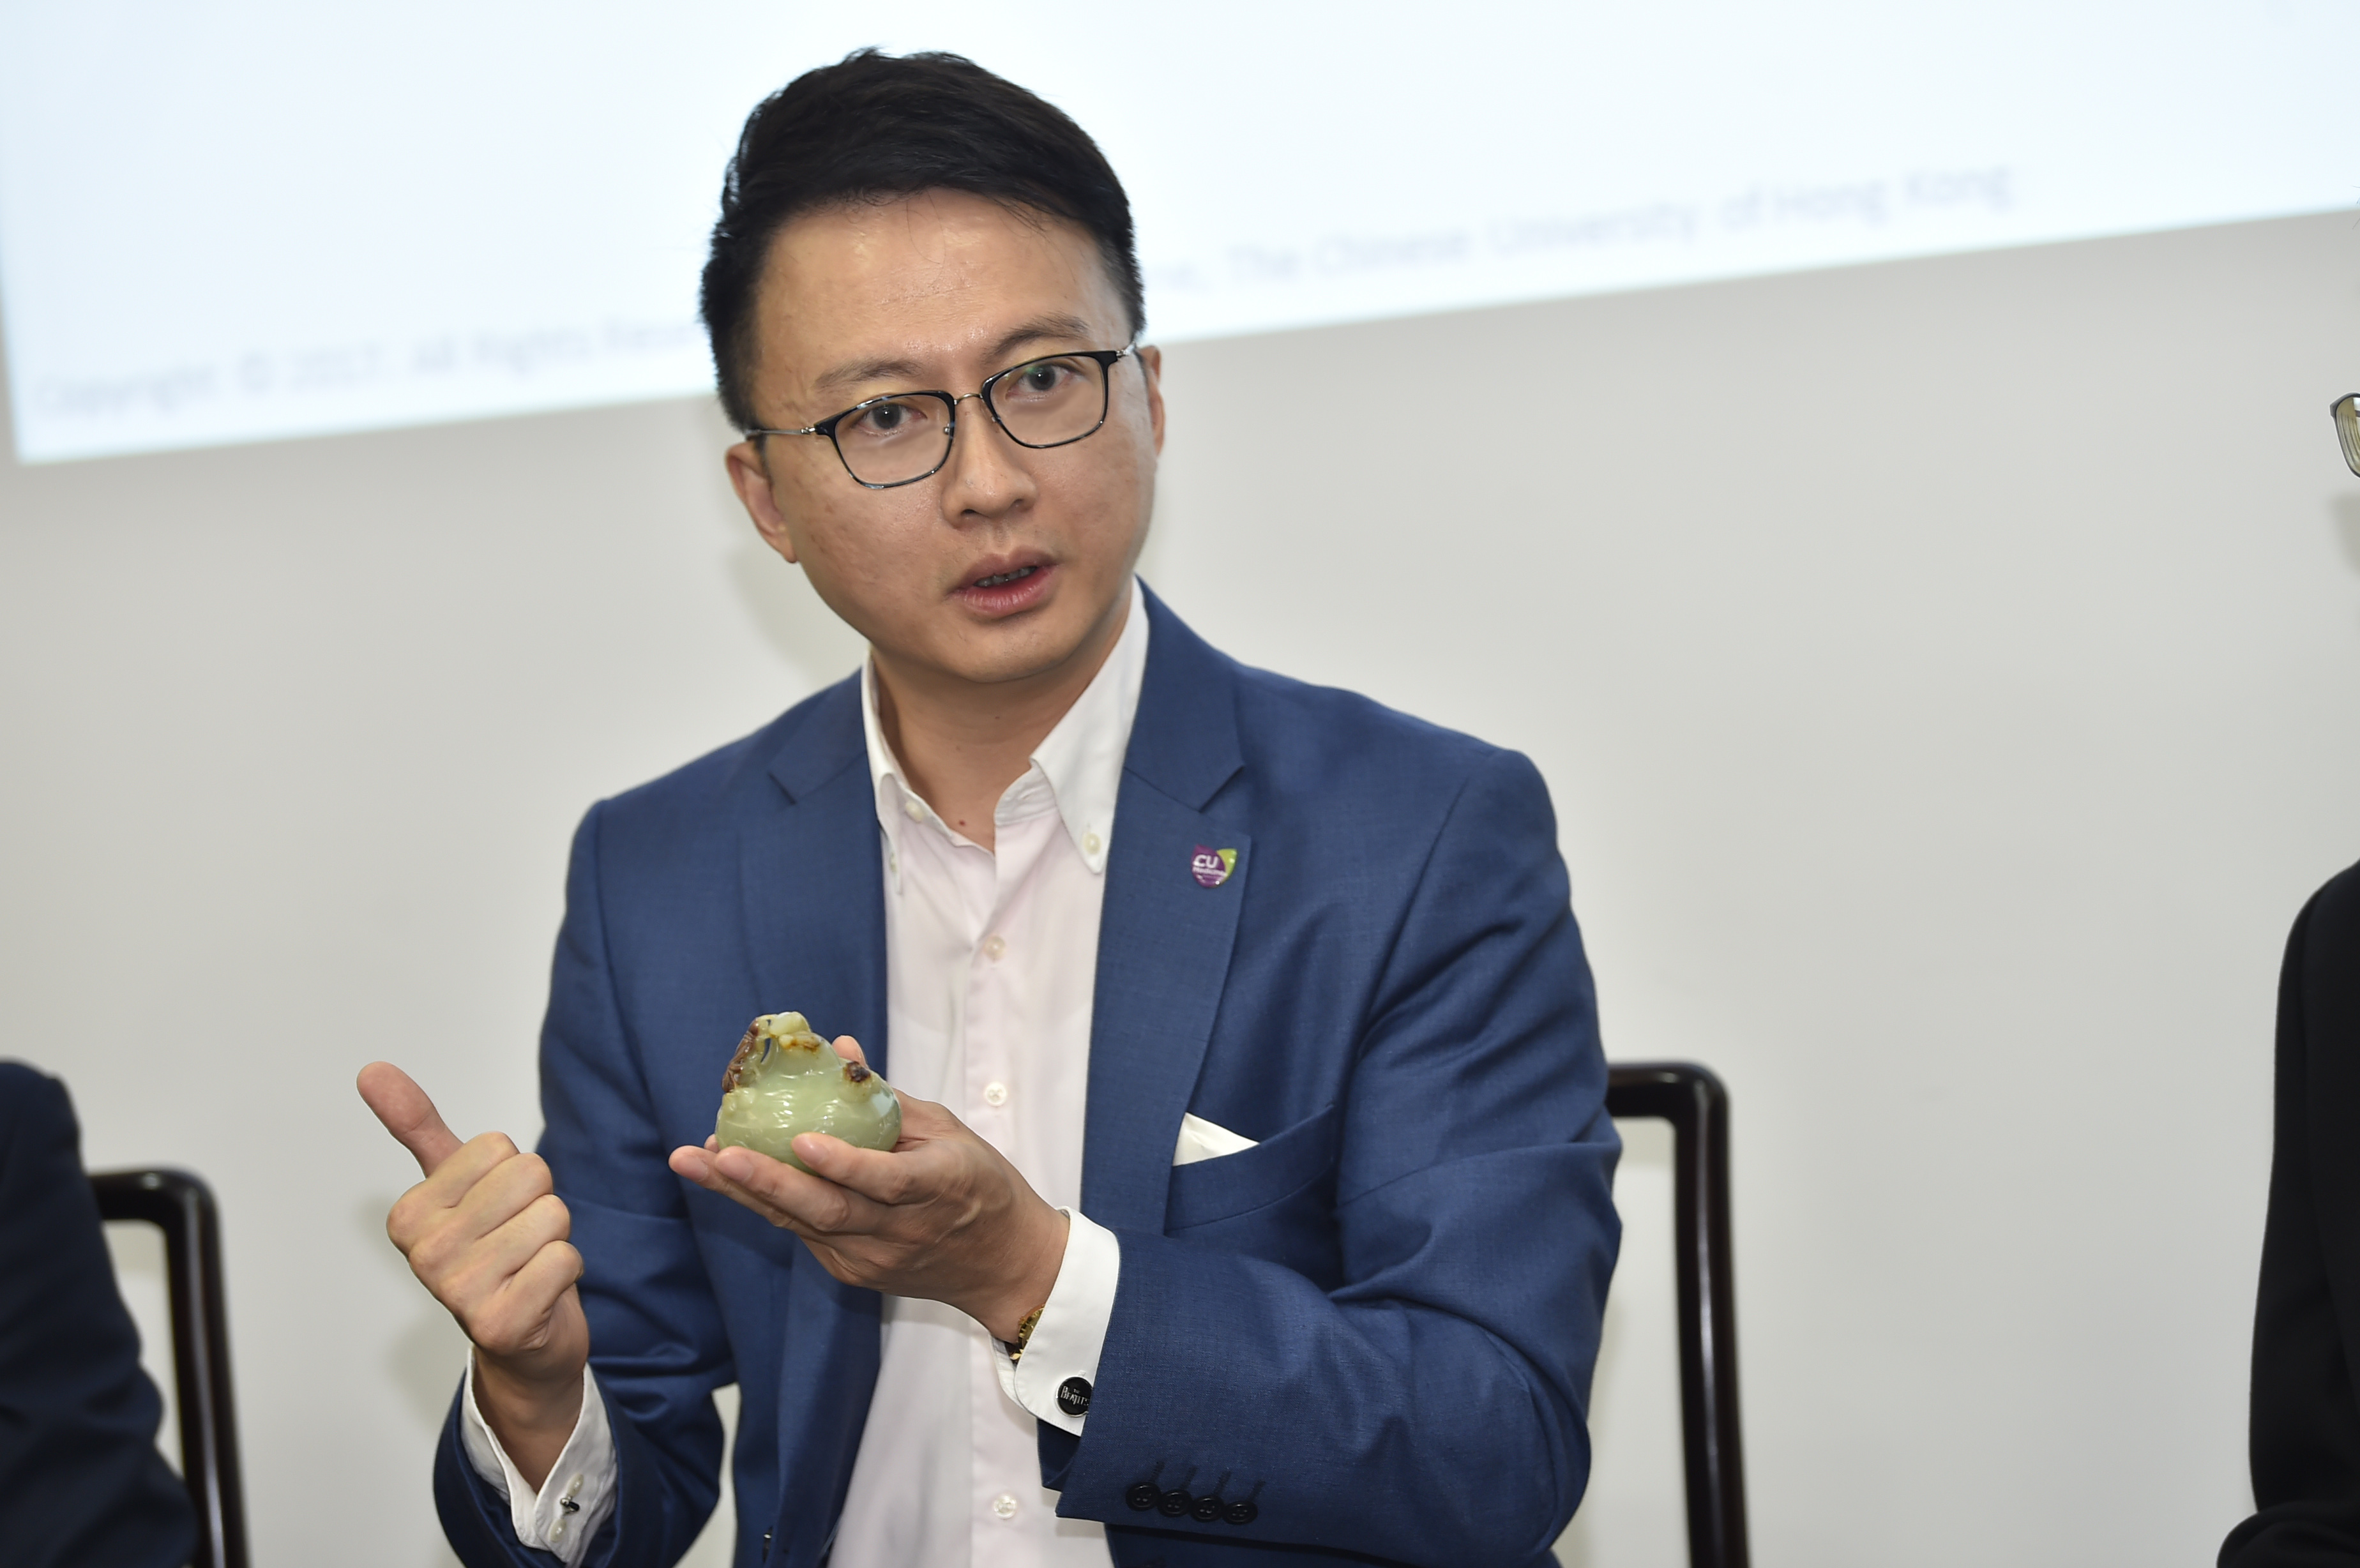 The Faculty of Medicine and the Art Museum of CUHK will jointly launch a museum-based programme to sharpen the medical students’ sensitivity to visual details, textures and shapes of objects, as well as their articulation skills. Professor Francis CHAN, Dean of the Faculty of Medicine at CUHK, highlights that the programme integrates art and science in education. It is a very good training for medical students to appreciate as well as to comprehend what they have seen, and the ultimate objective is to help them better care for their patients.